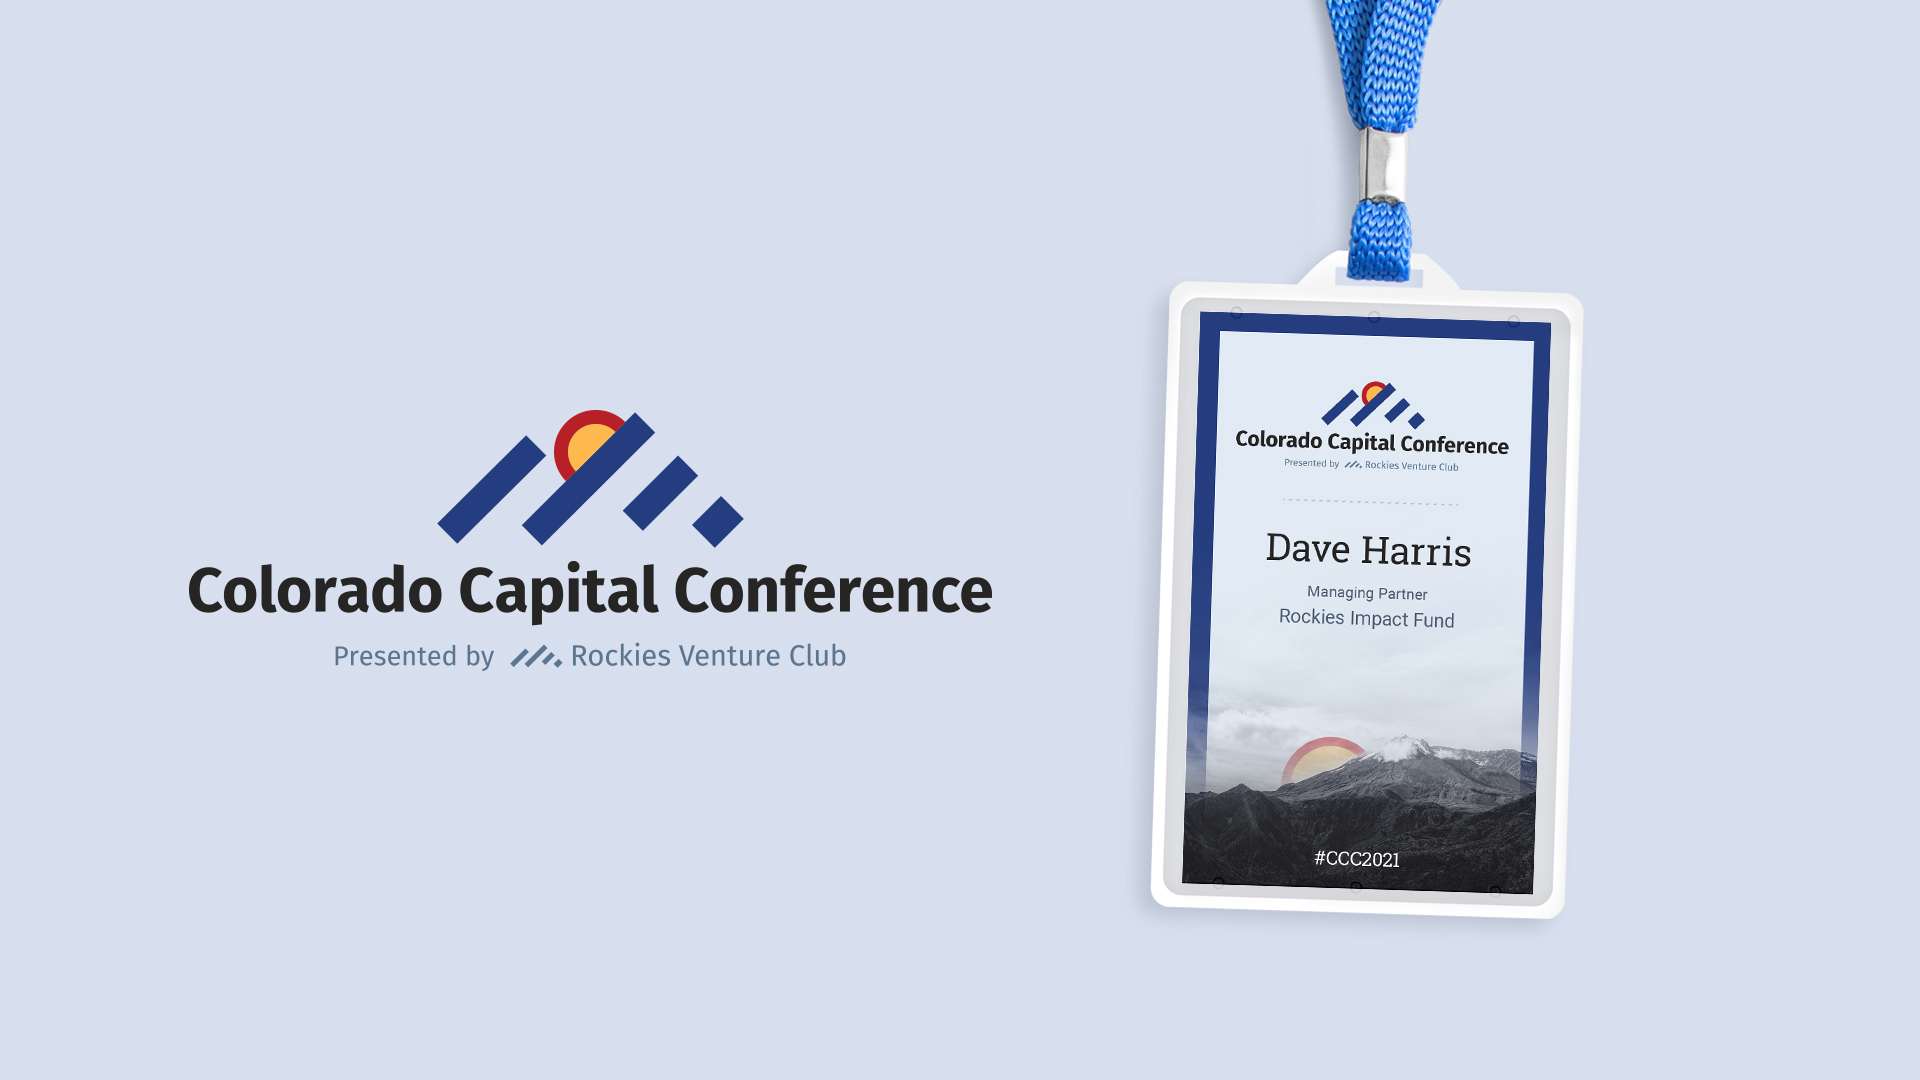 A new look for the Colorado Capital Conference, Denver's largest angel investing event. The 2020 Conference will take place on August 13.